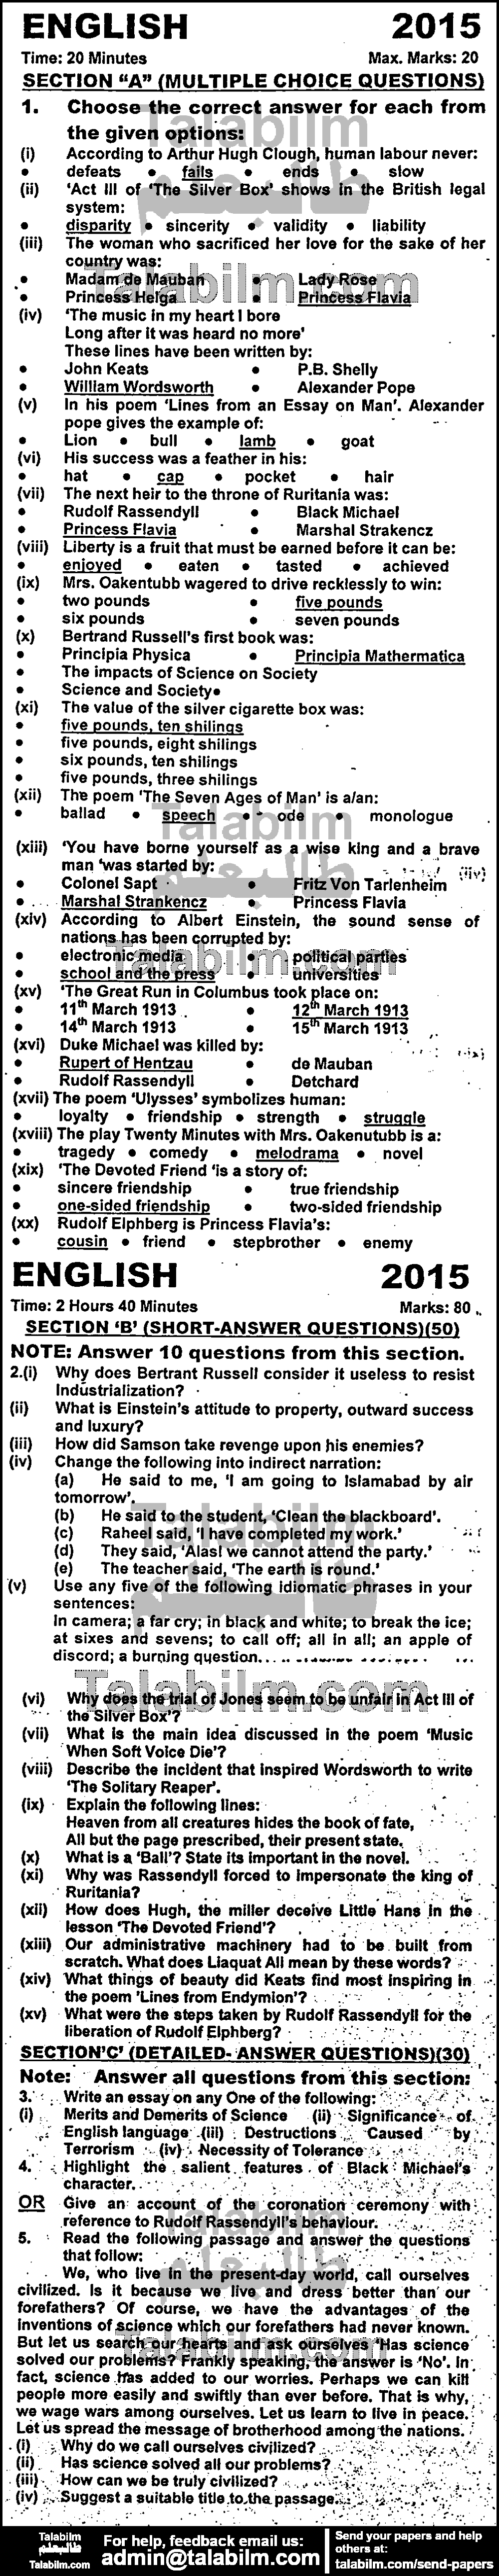 English 0 past paper for Group-I 2015